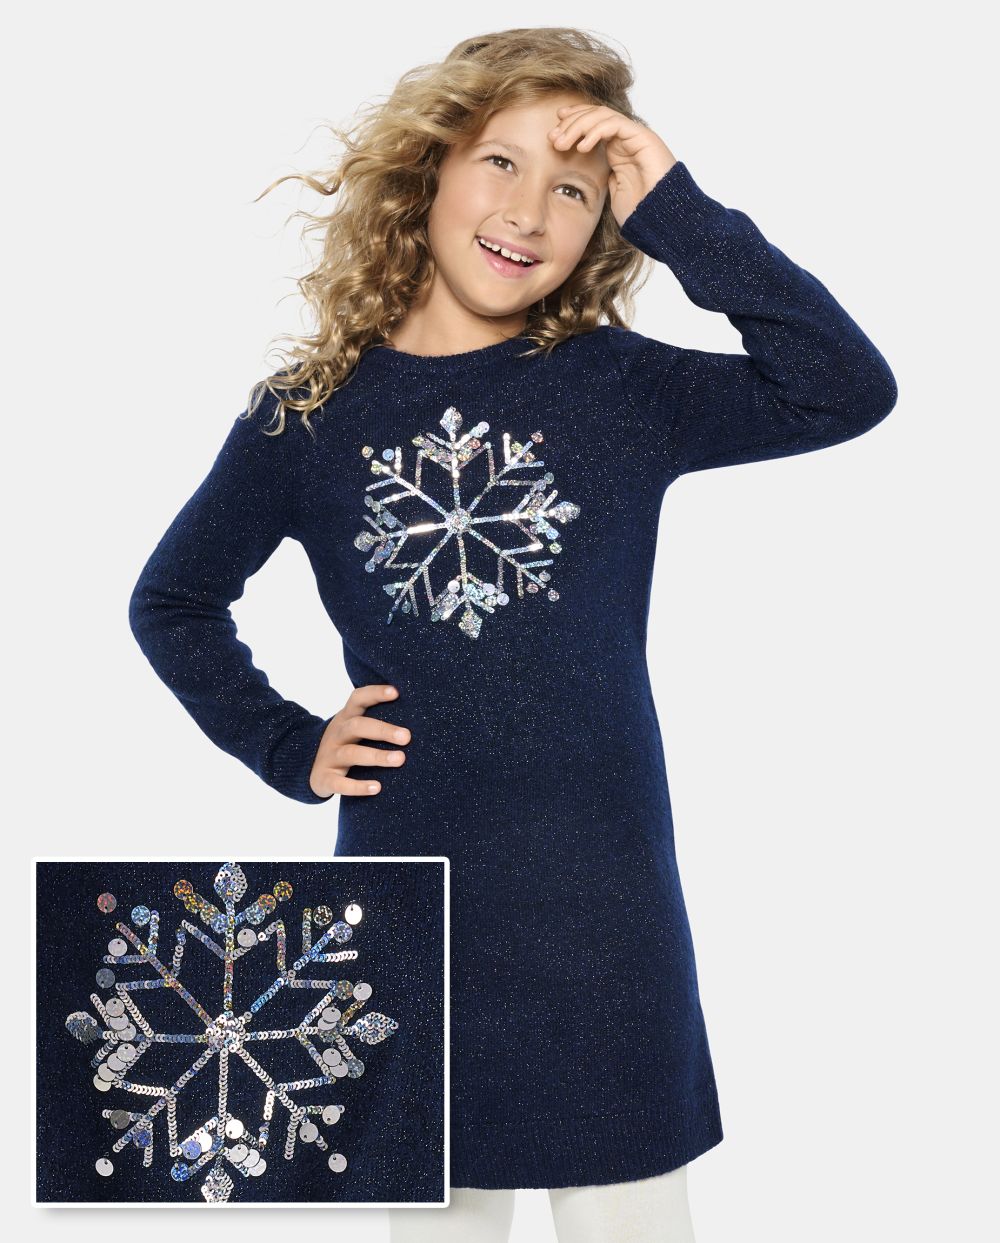 Tall Girls Sweater Long Sleeves Above the Knee Crew Neck Sequined Dress